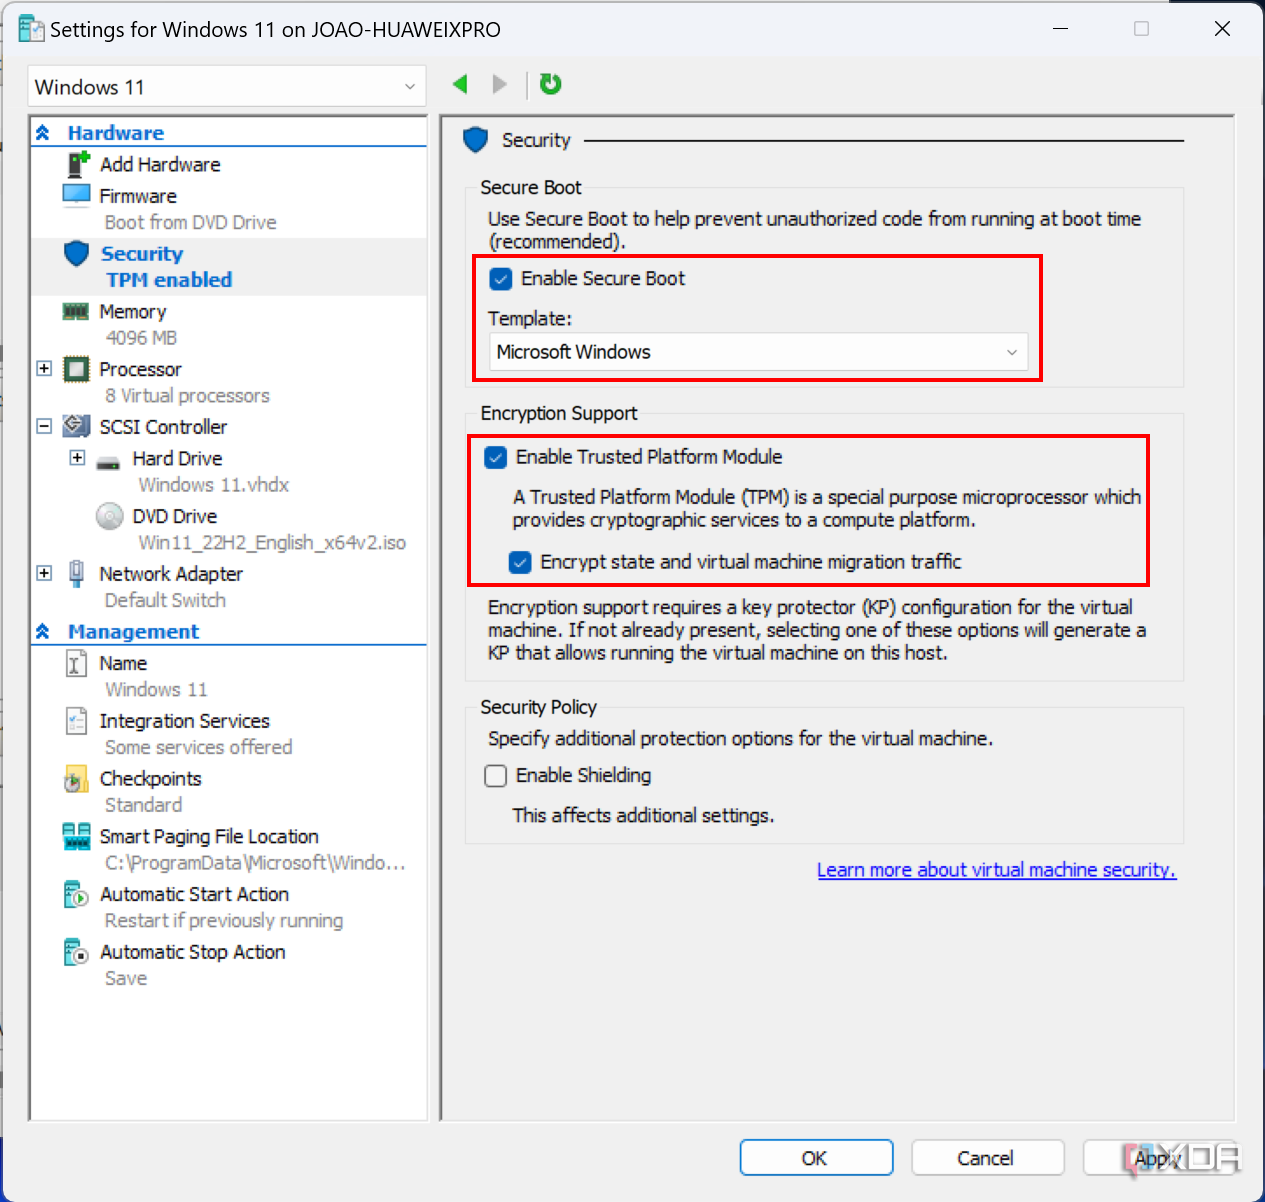 Screenshot of virtual machine security settings showing that secure boot and Trusted Platform Module are enabled